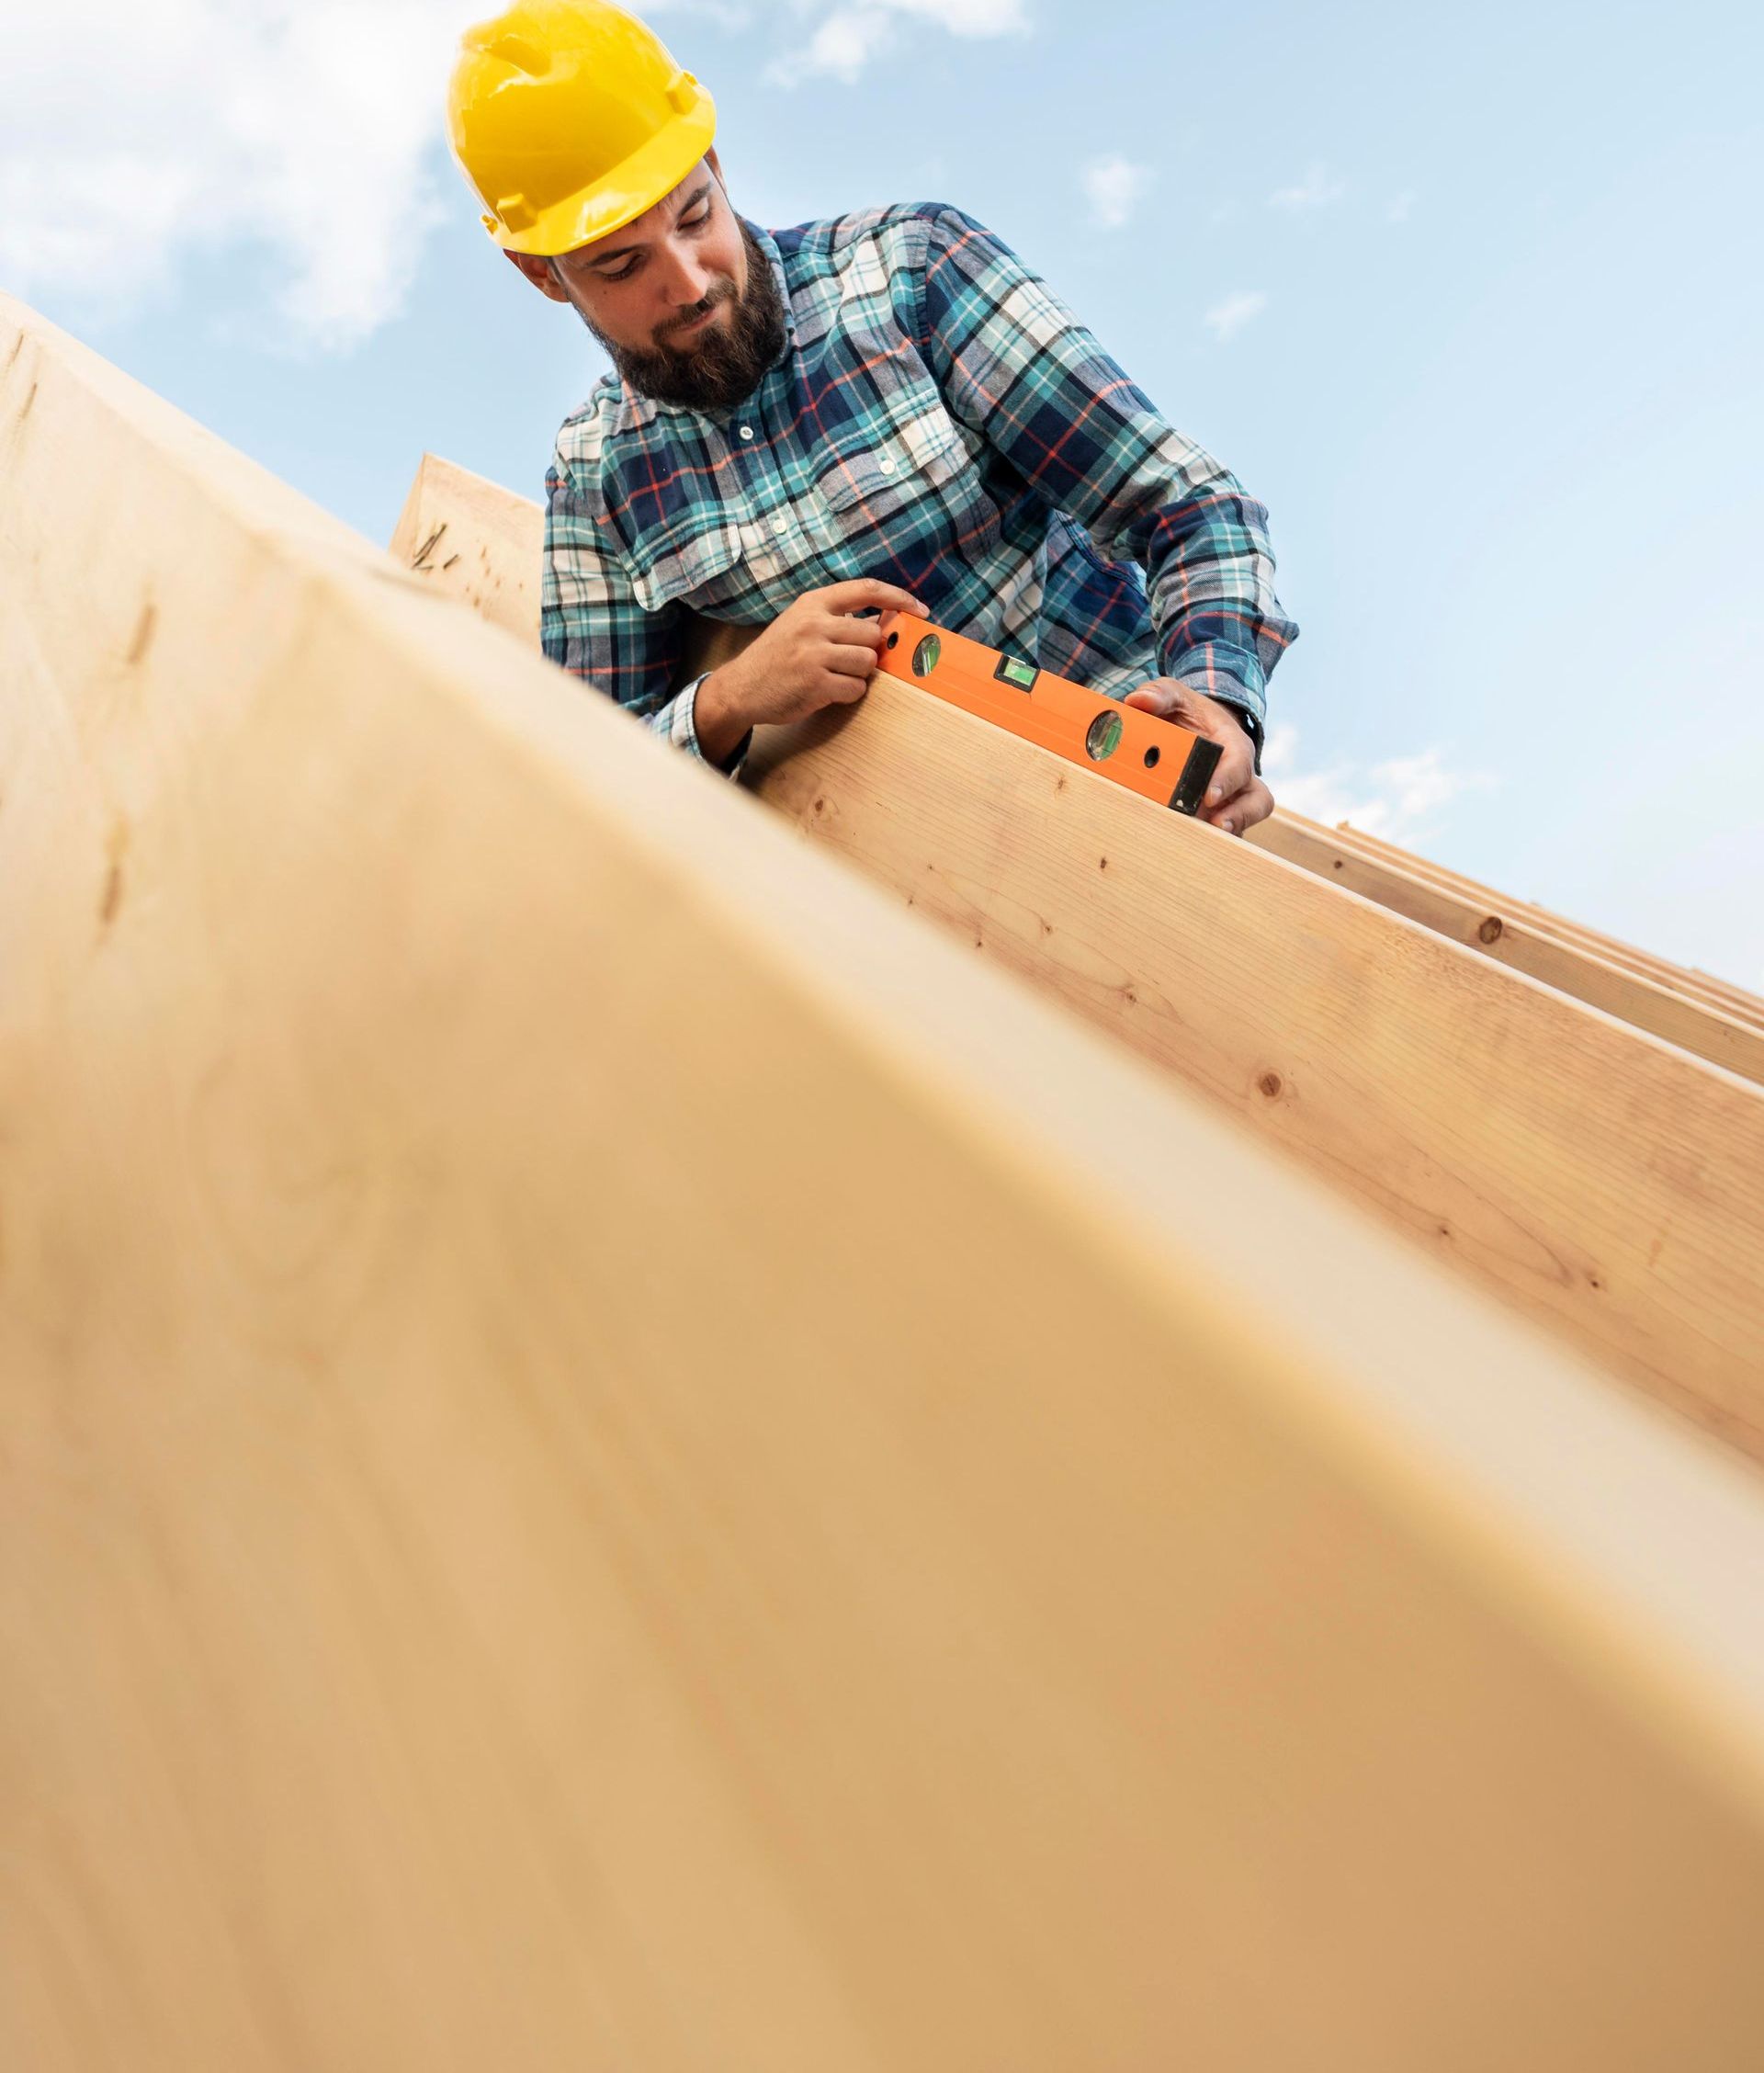 a man wearing a hard hat is working on a piece of wood .